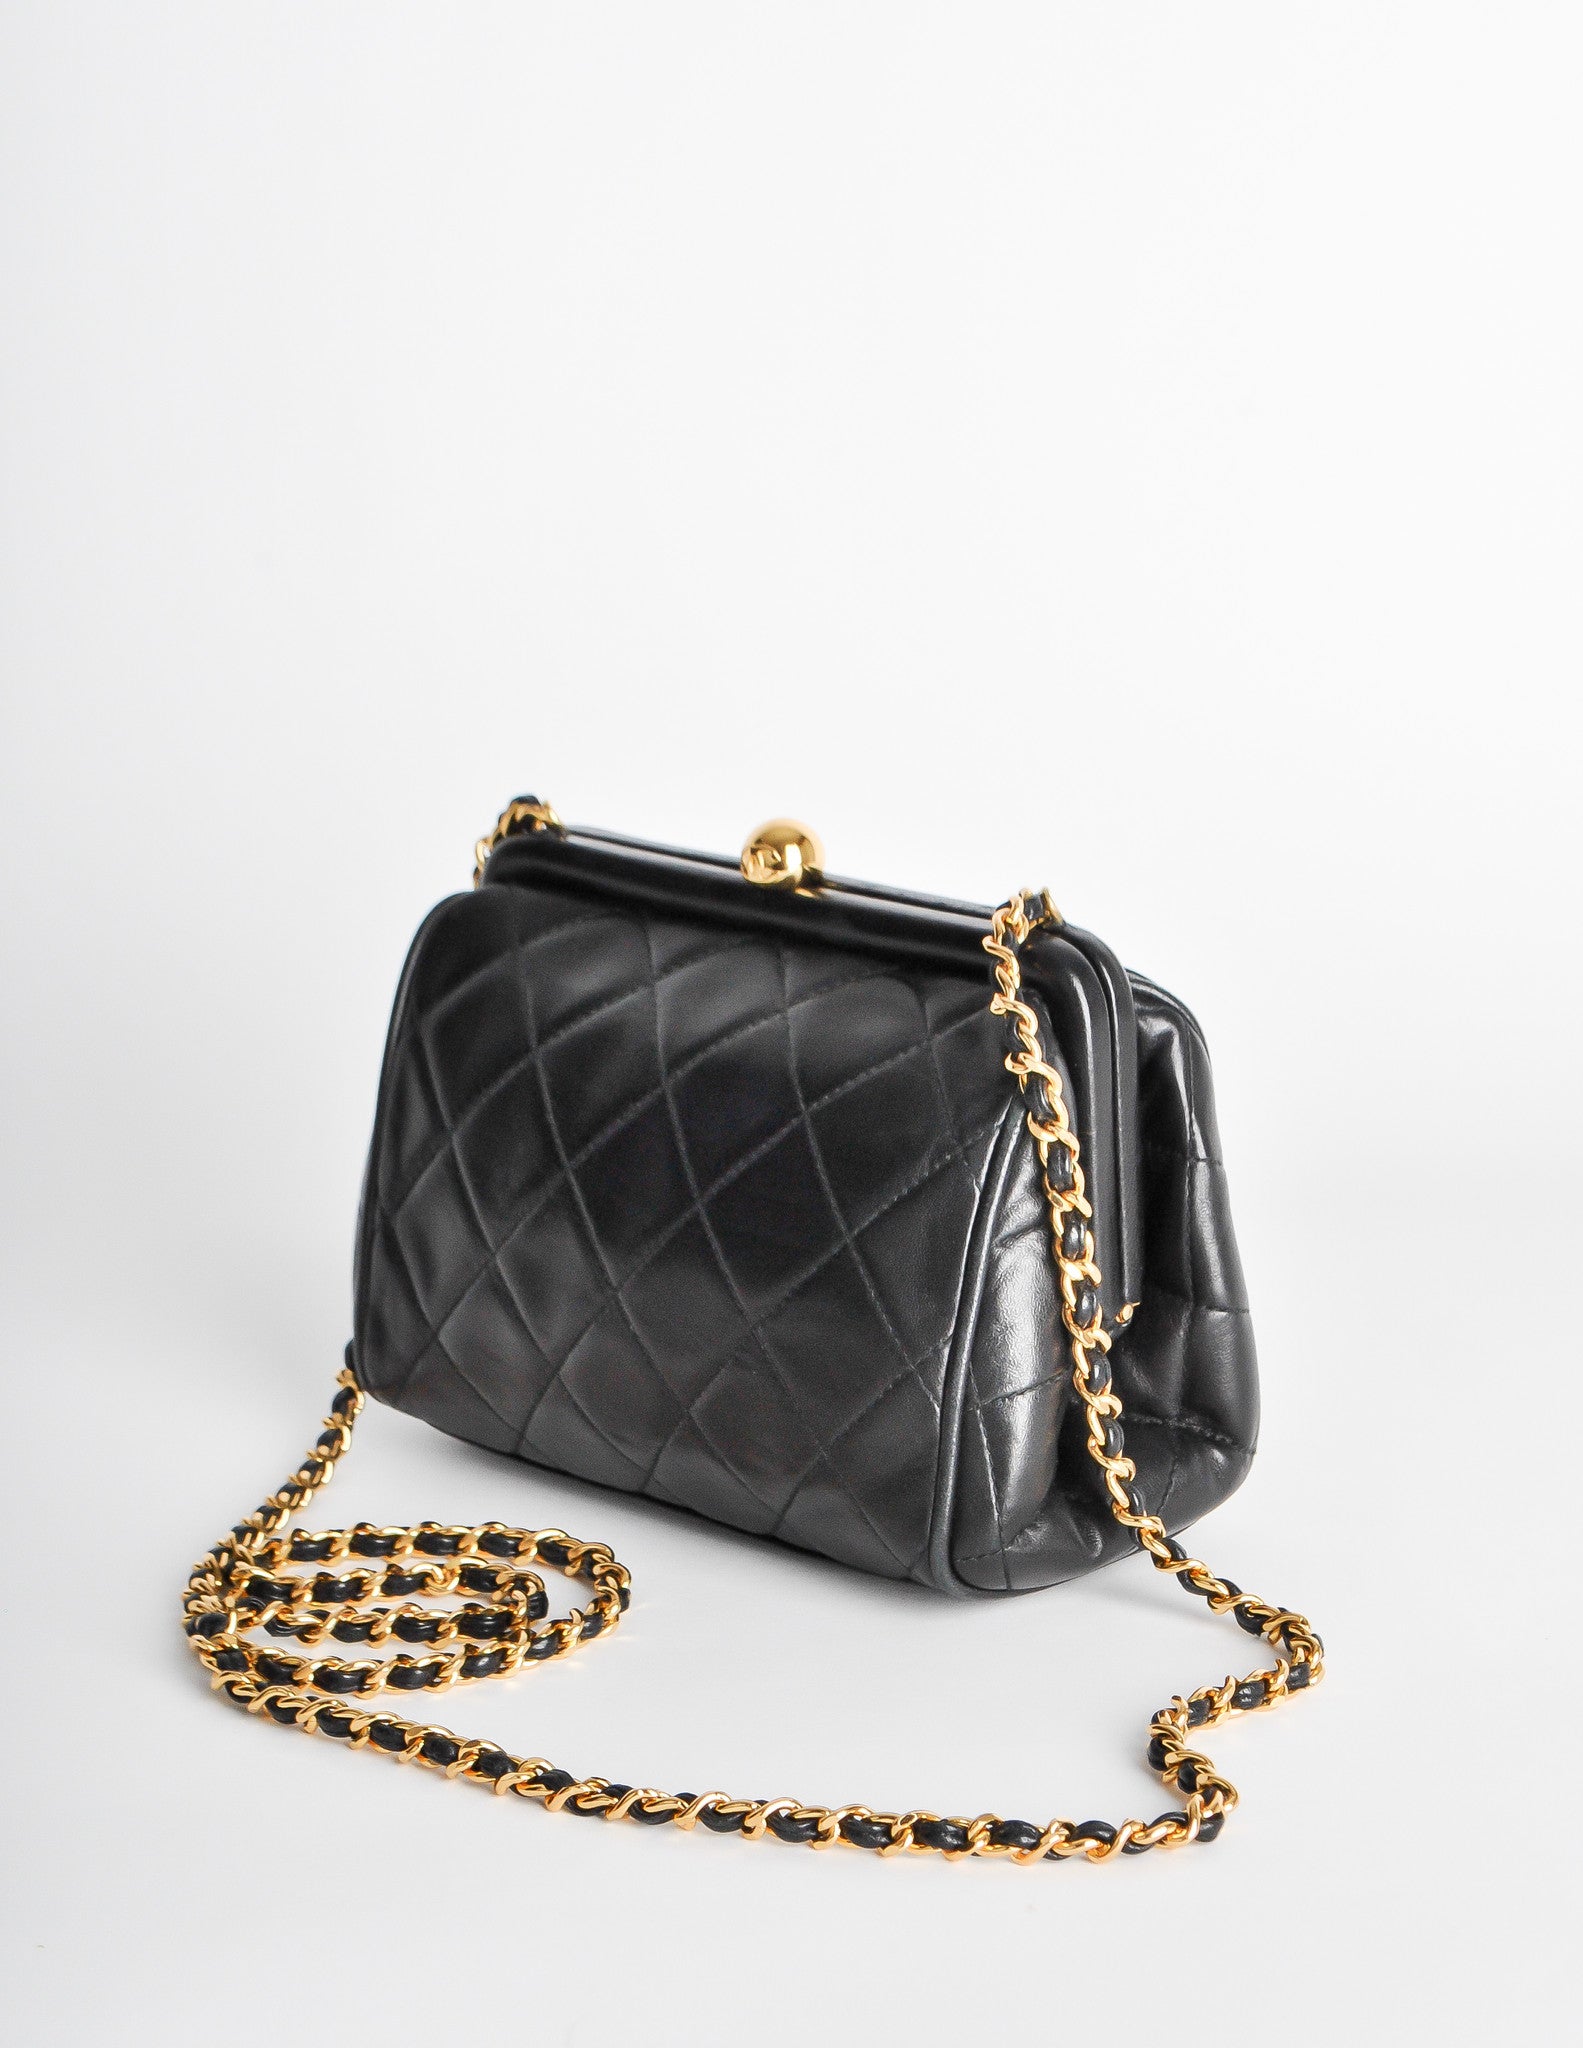 Chanel Vintage Black Quilted Crossbody Bag - from Amarcord Vintage Fashion